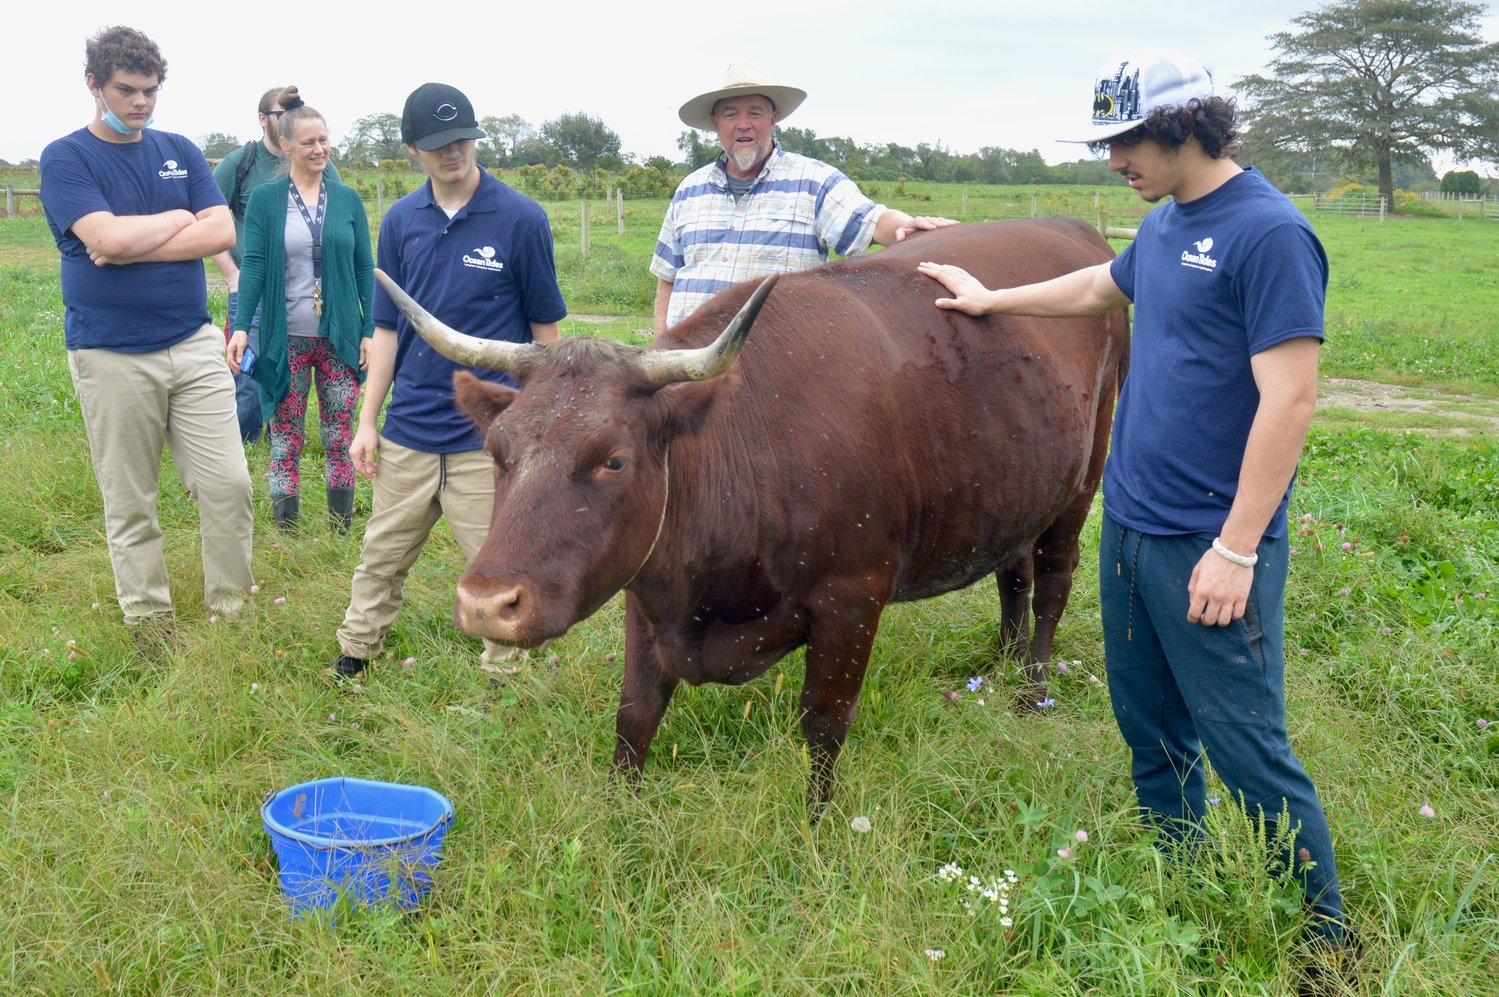 Fern, the herd leader at Cloverbud Ranch, is surrounded by Martin Beck (center) and students and staff from Ocean Tides School.